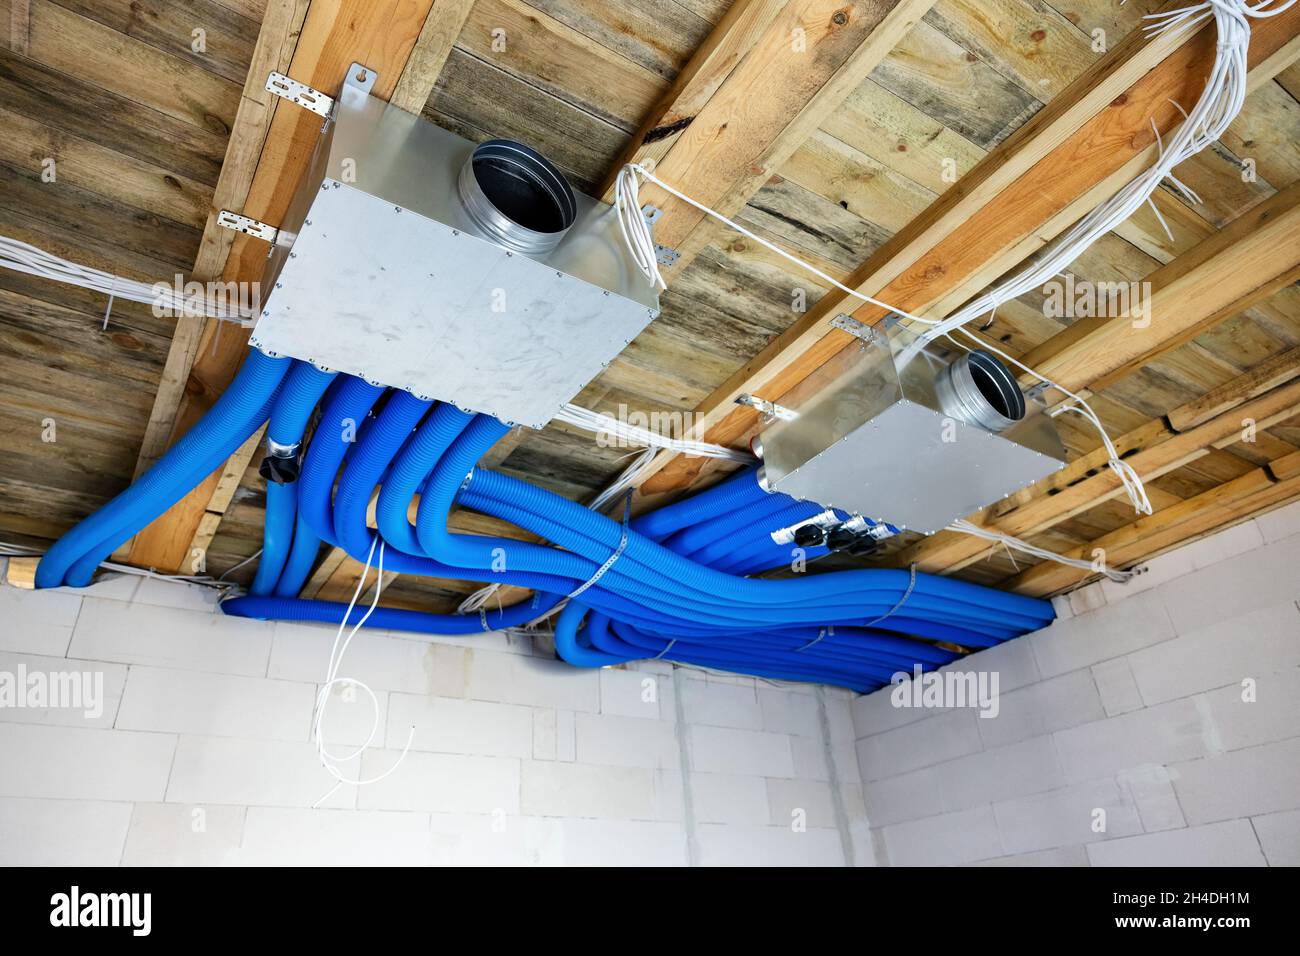 heat recovery ventilation system installation in new house. air filtration Stock Photo